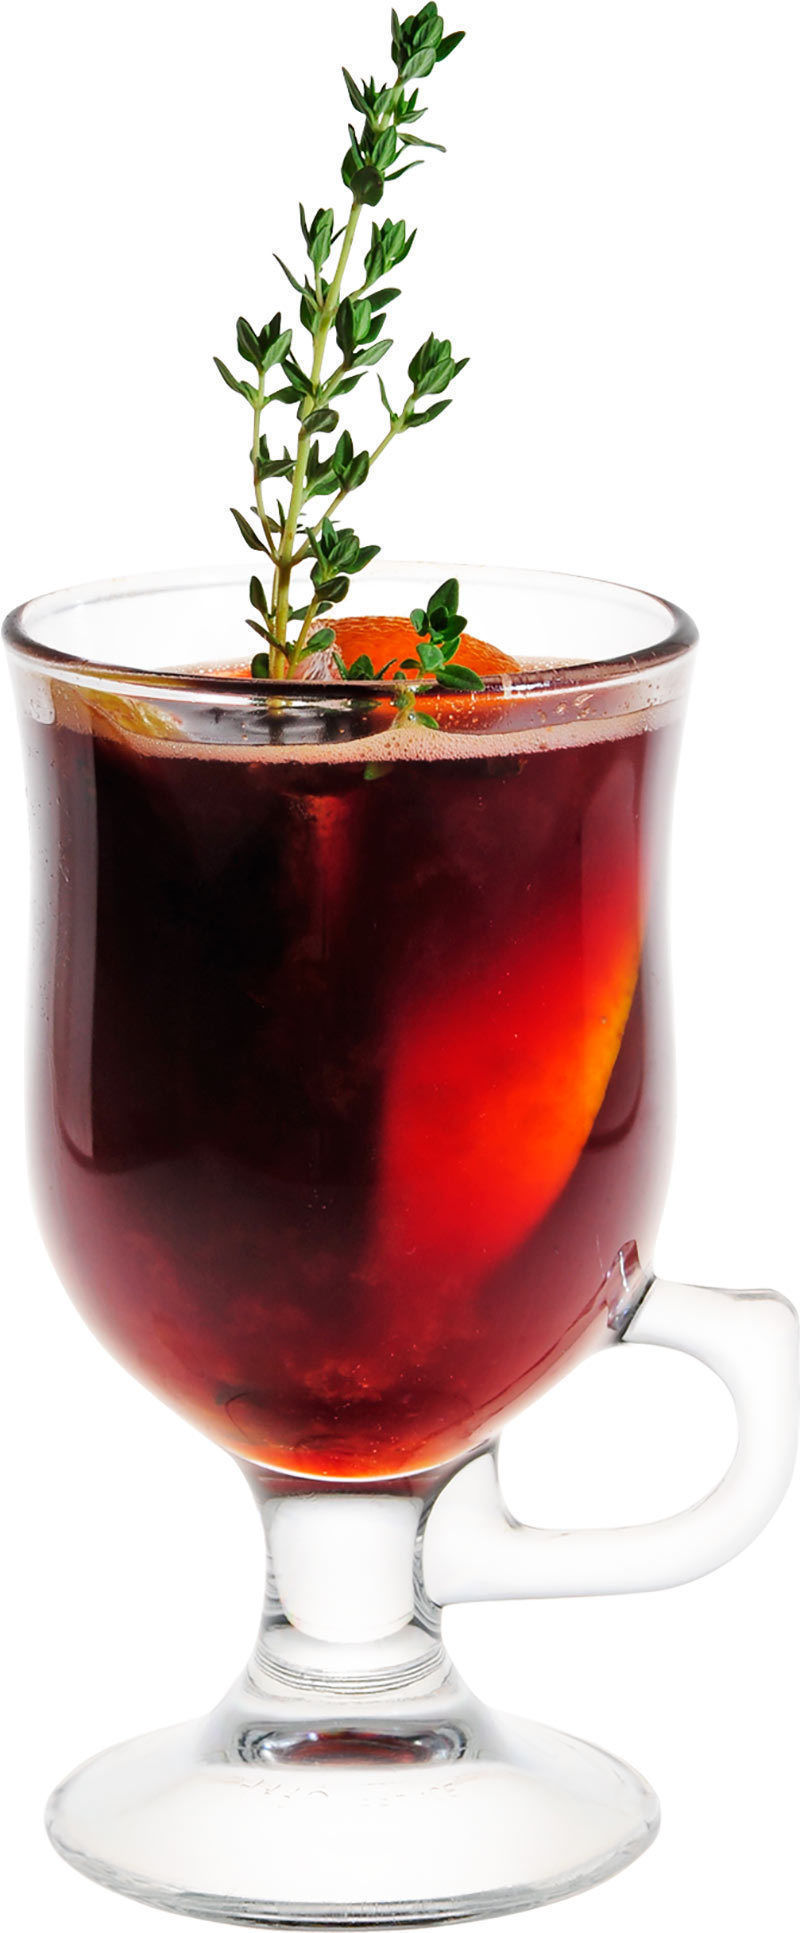 How to Make the Sea Buckthorn Mulled Wine